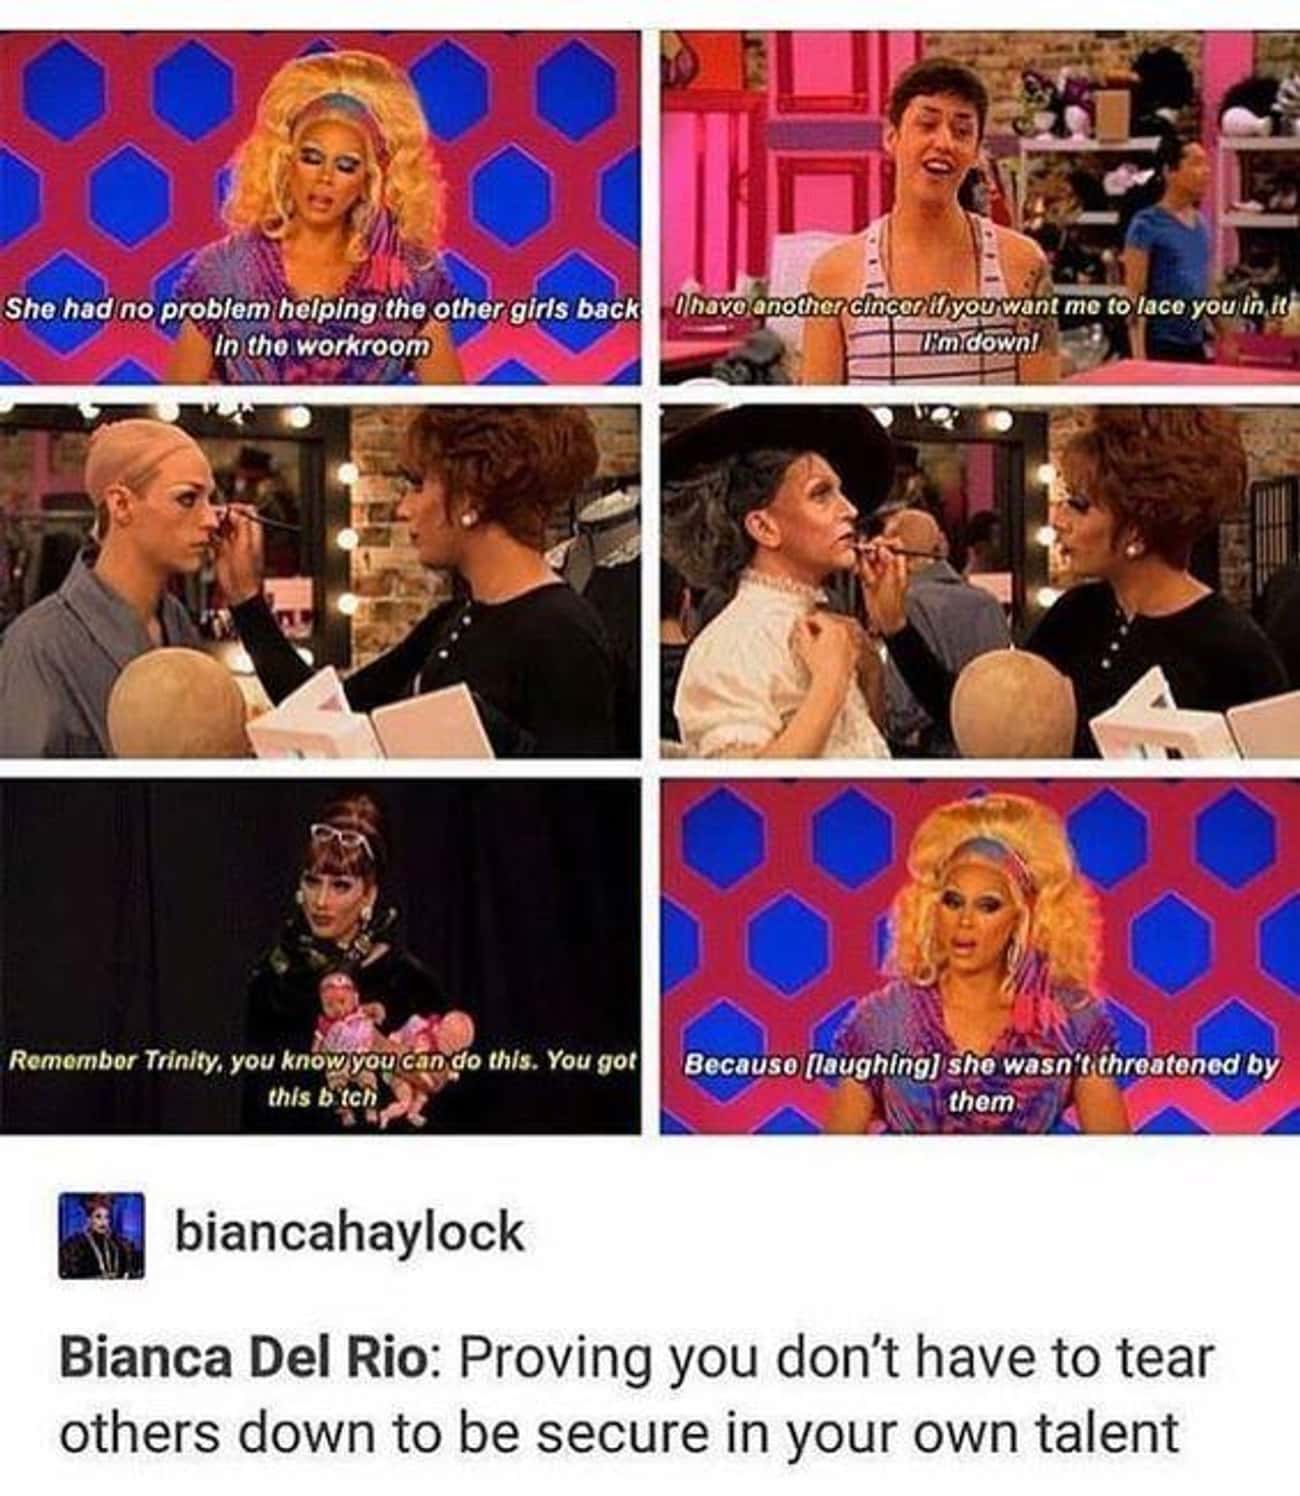 Bianca Del Rio Helps Other Queens Because She's Not Threatened By Them